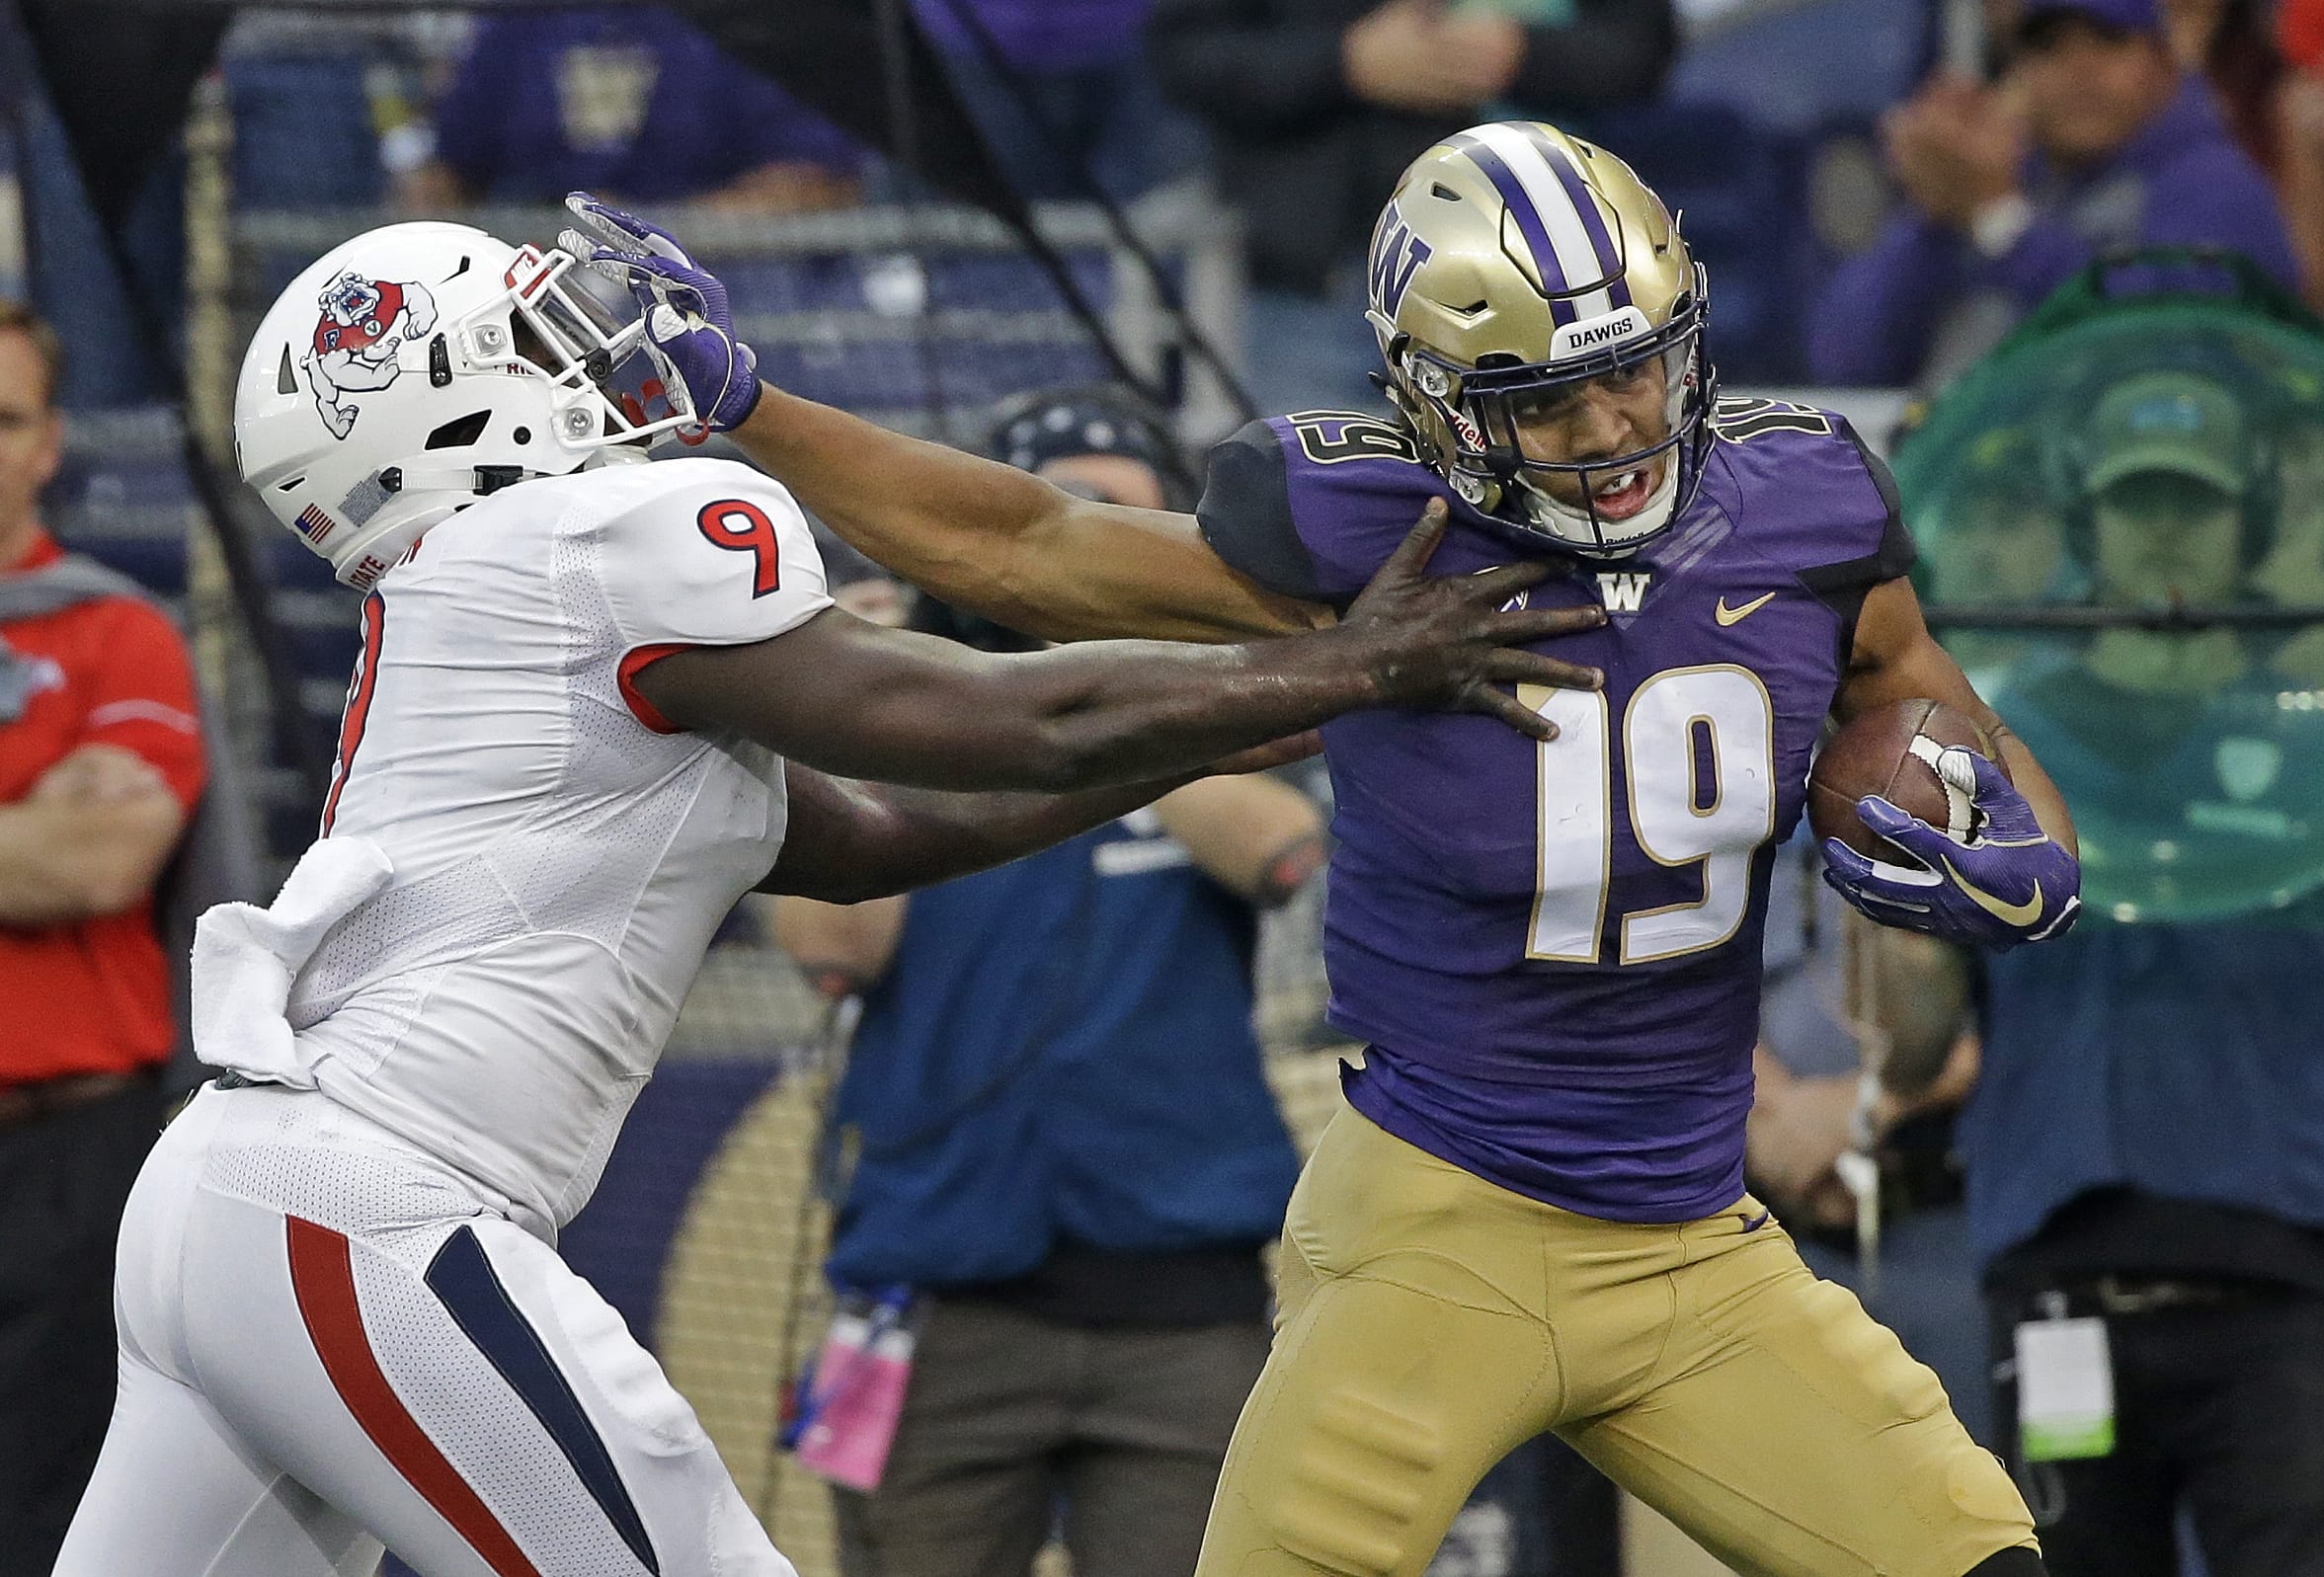 After spending more than half the season recovering from knee surgery in June, Washington’s Hunter Bryant (19) has provided a boost for the 10th-ranked Huskies’ offense this season.